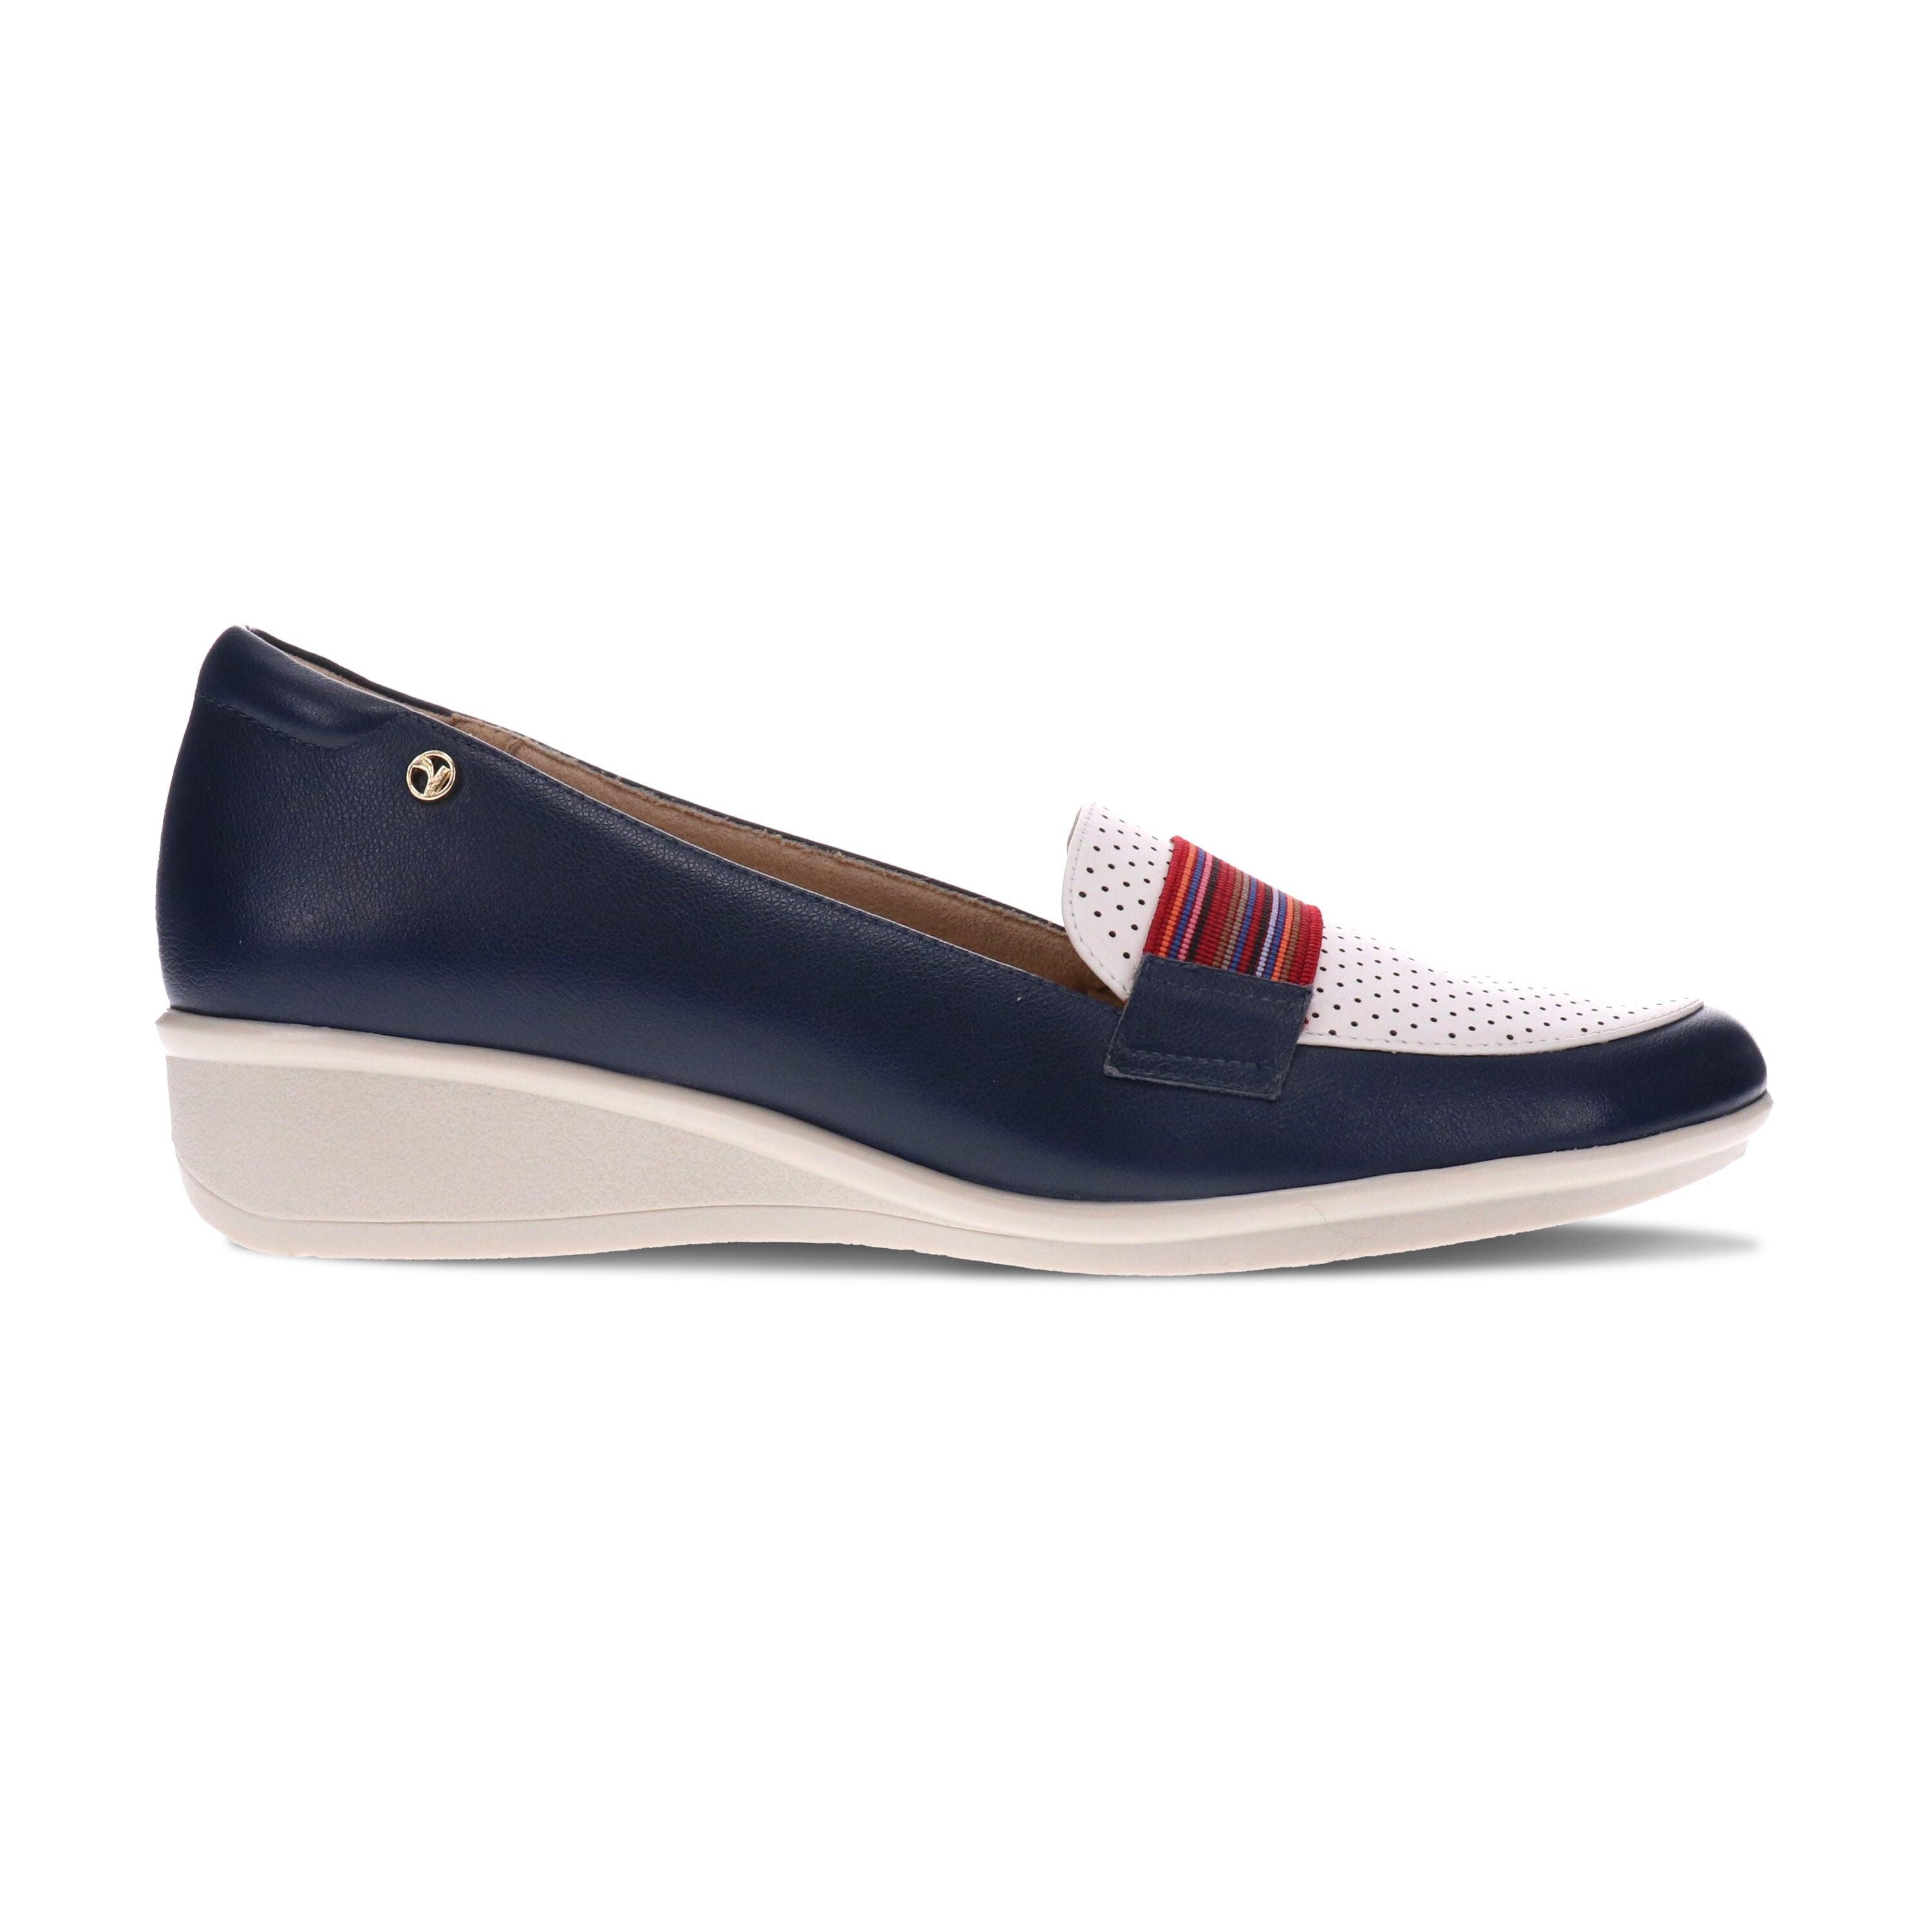 Monte Carlo Wedge Loafer - Revere Shoes